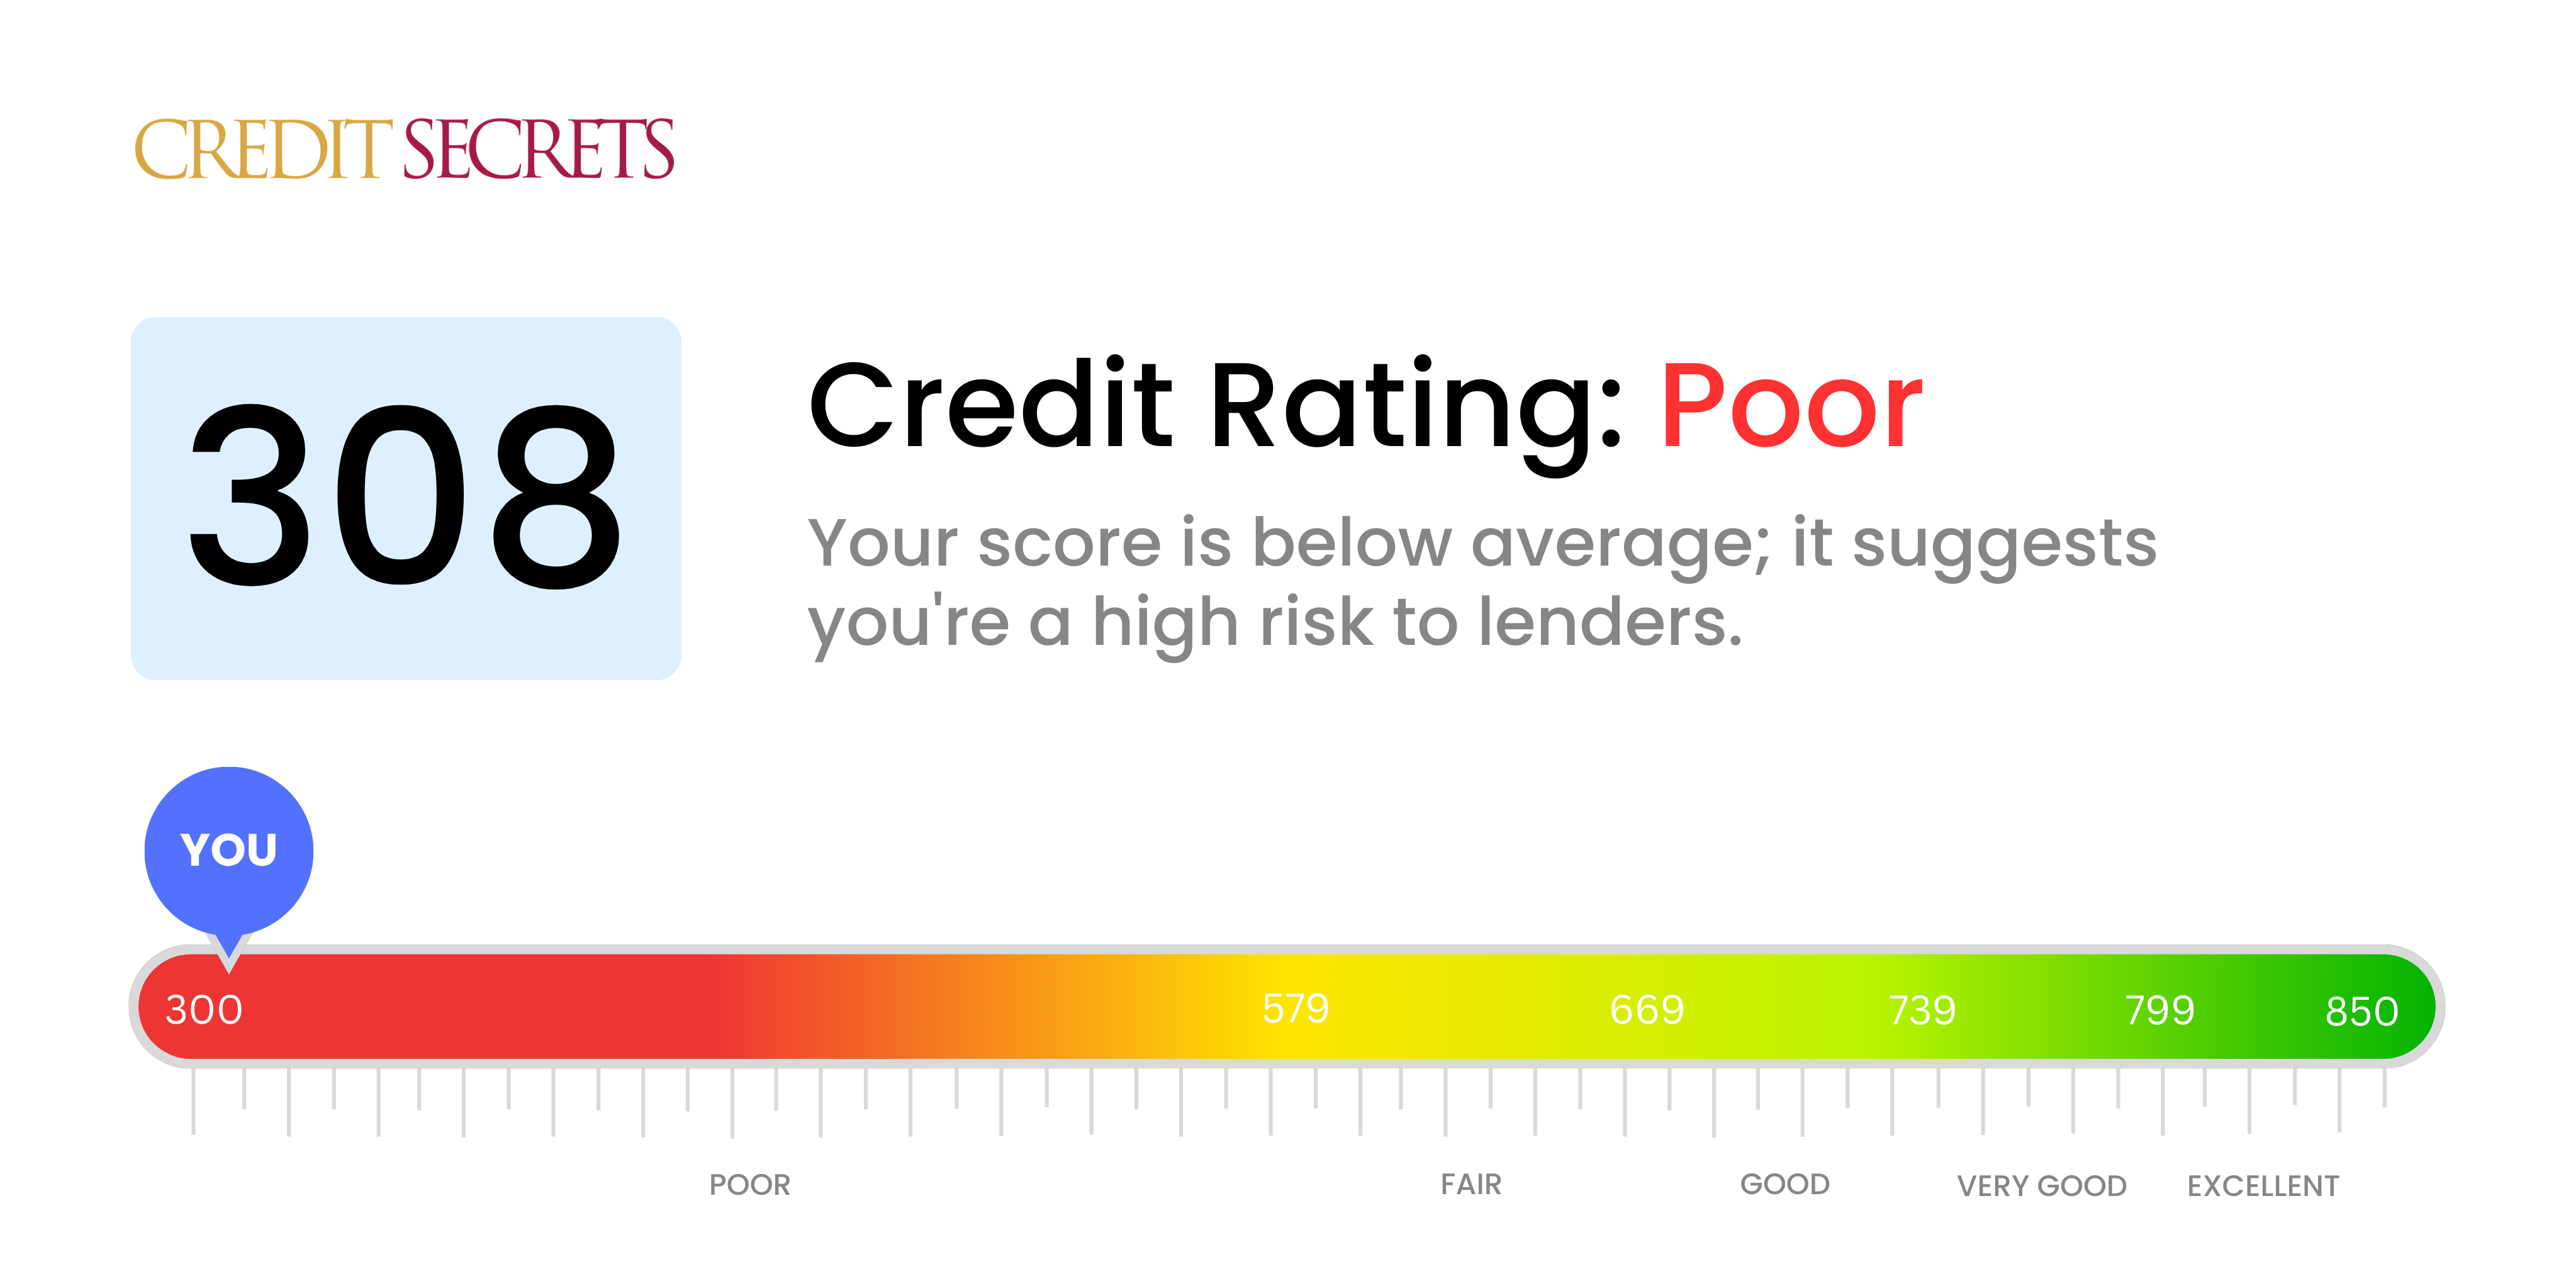 Is 308 a good credit score?